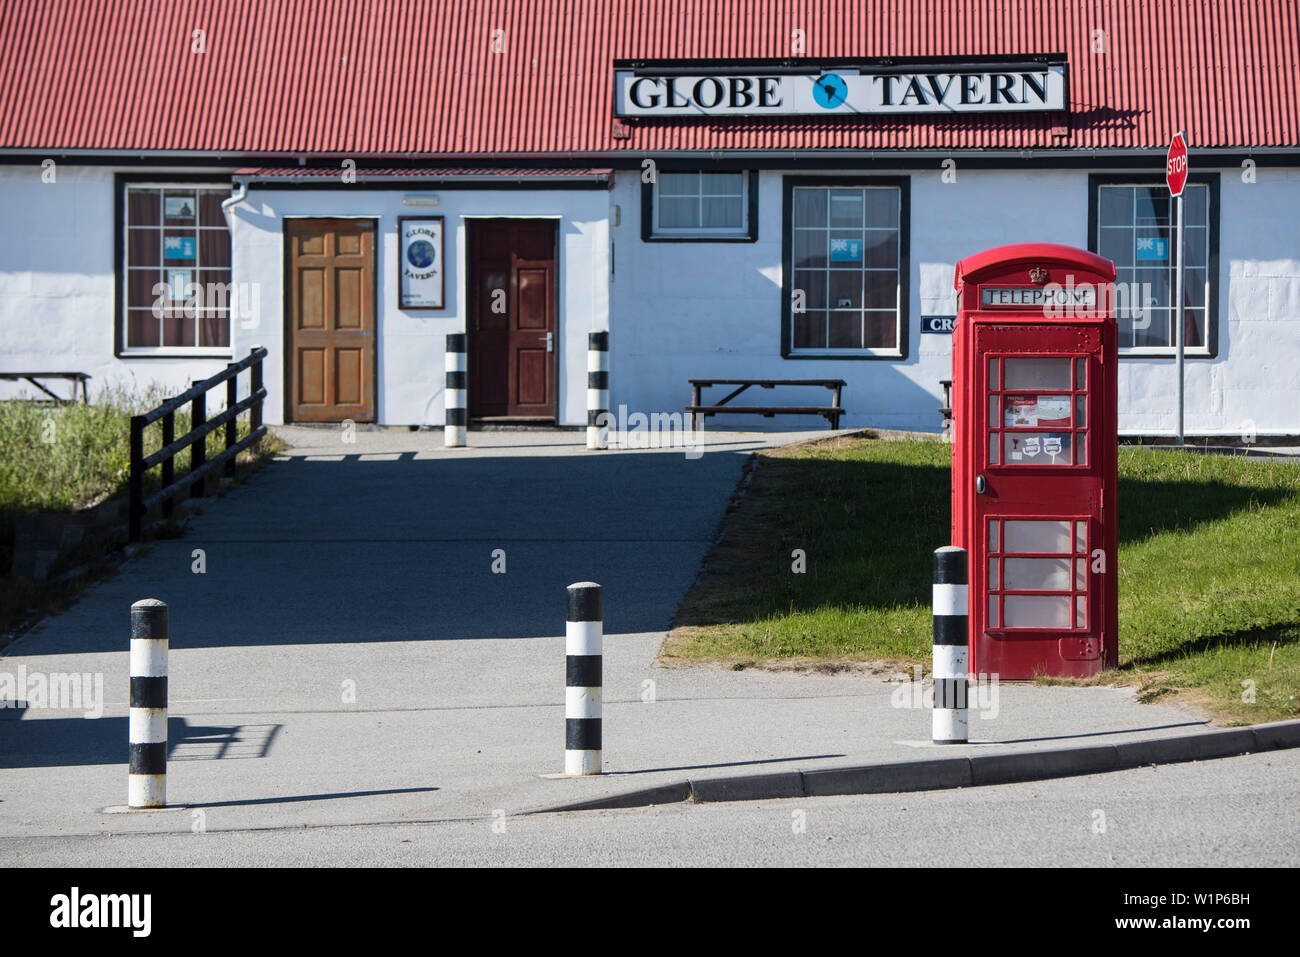 A typical red telephone booth stands in front of the Globe Tavern, one of the capital city's tourist attractions, Stanley, East Falkland, Falkland Isl Stock Photo